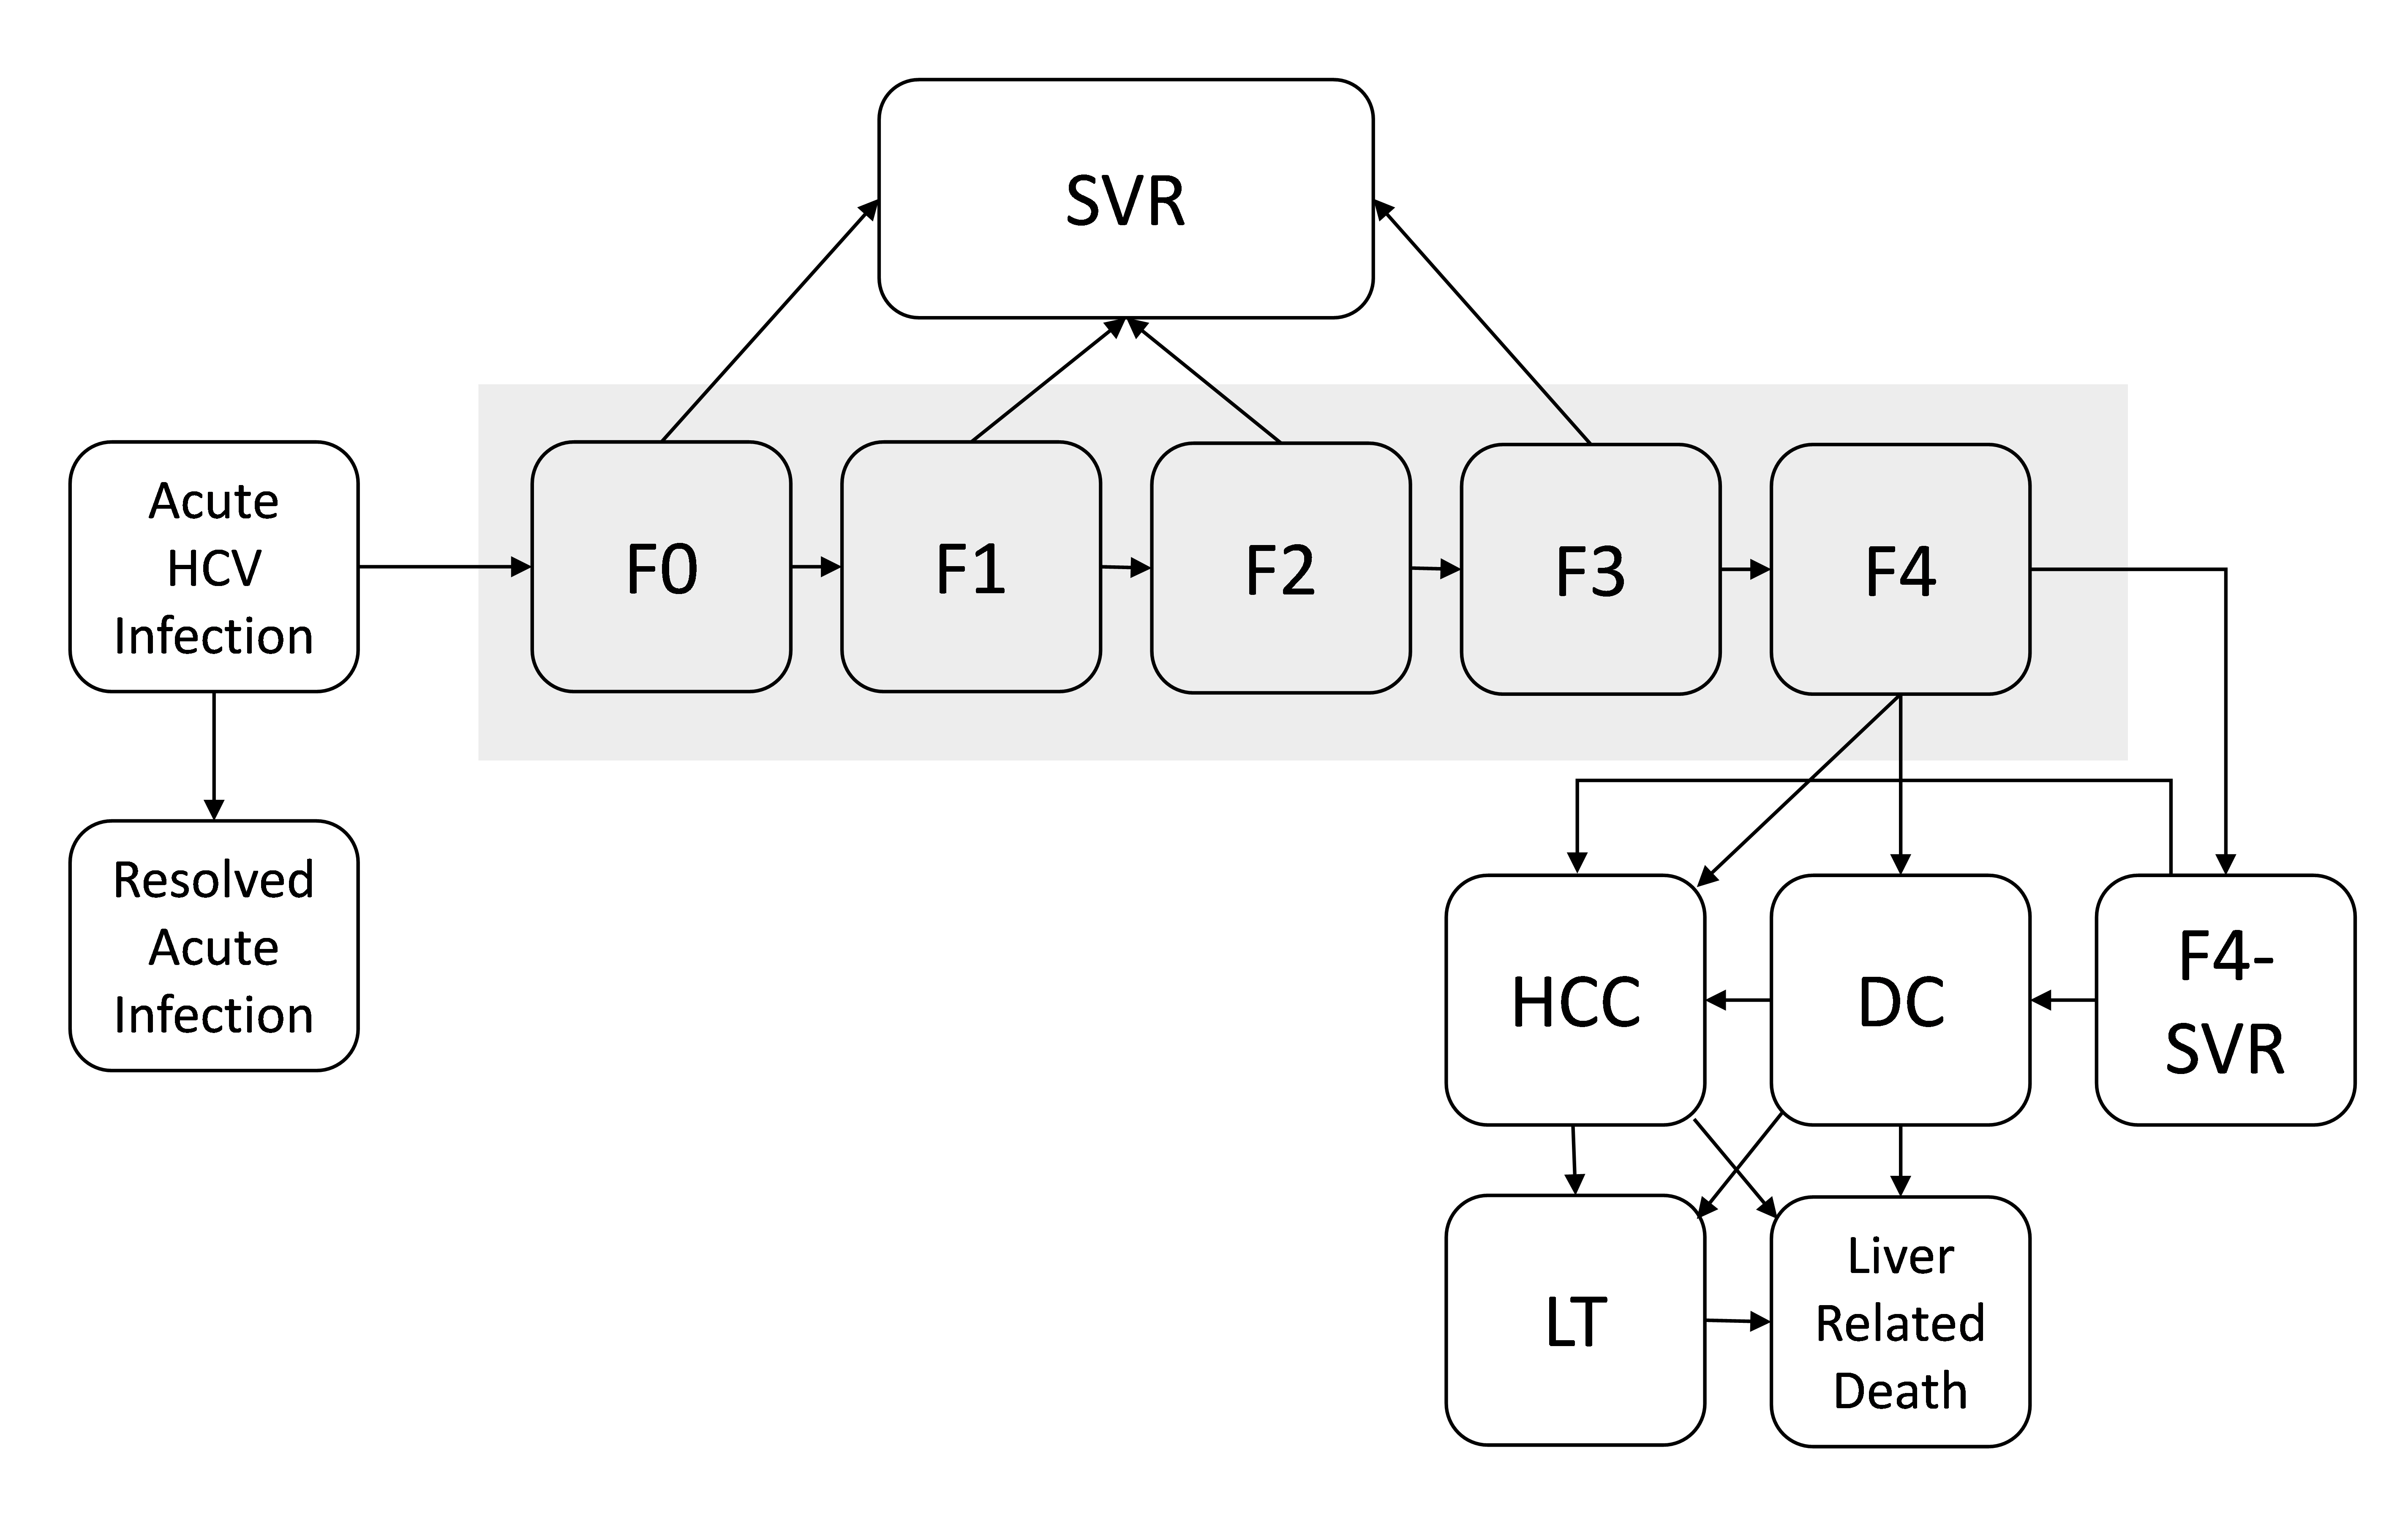 Schematic showing State-transition model of the natural history of HCV.